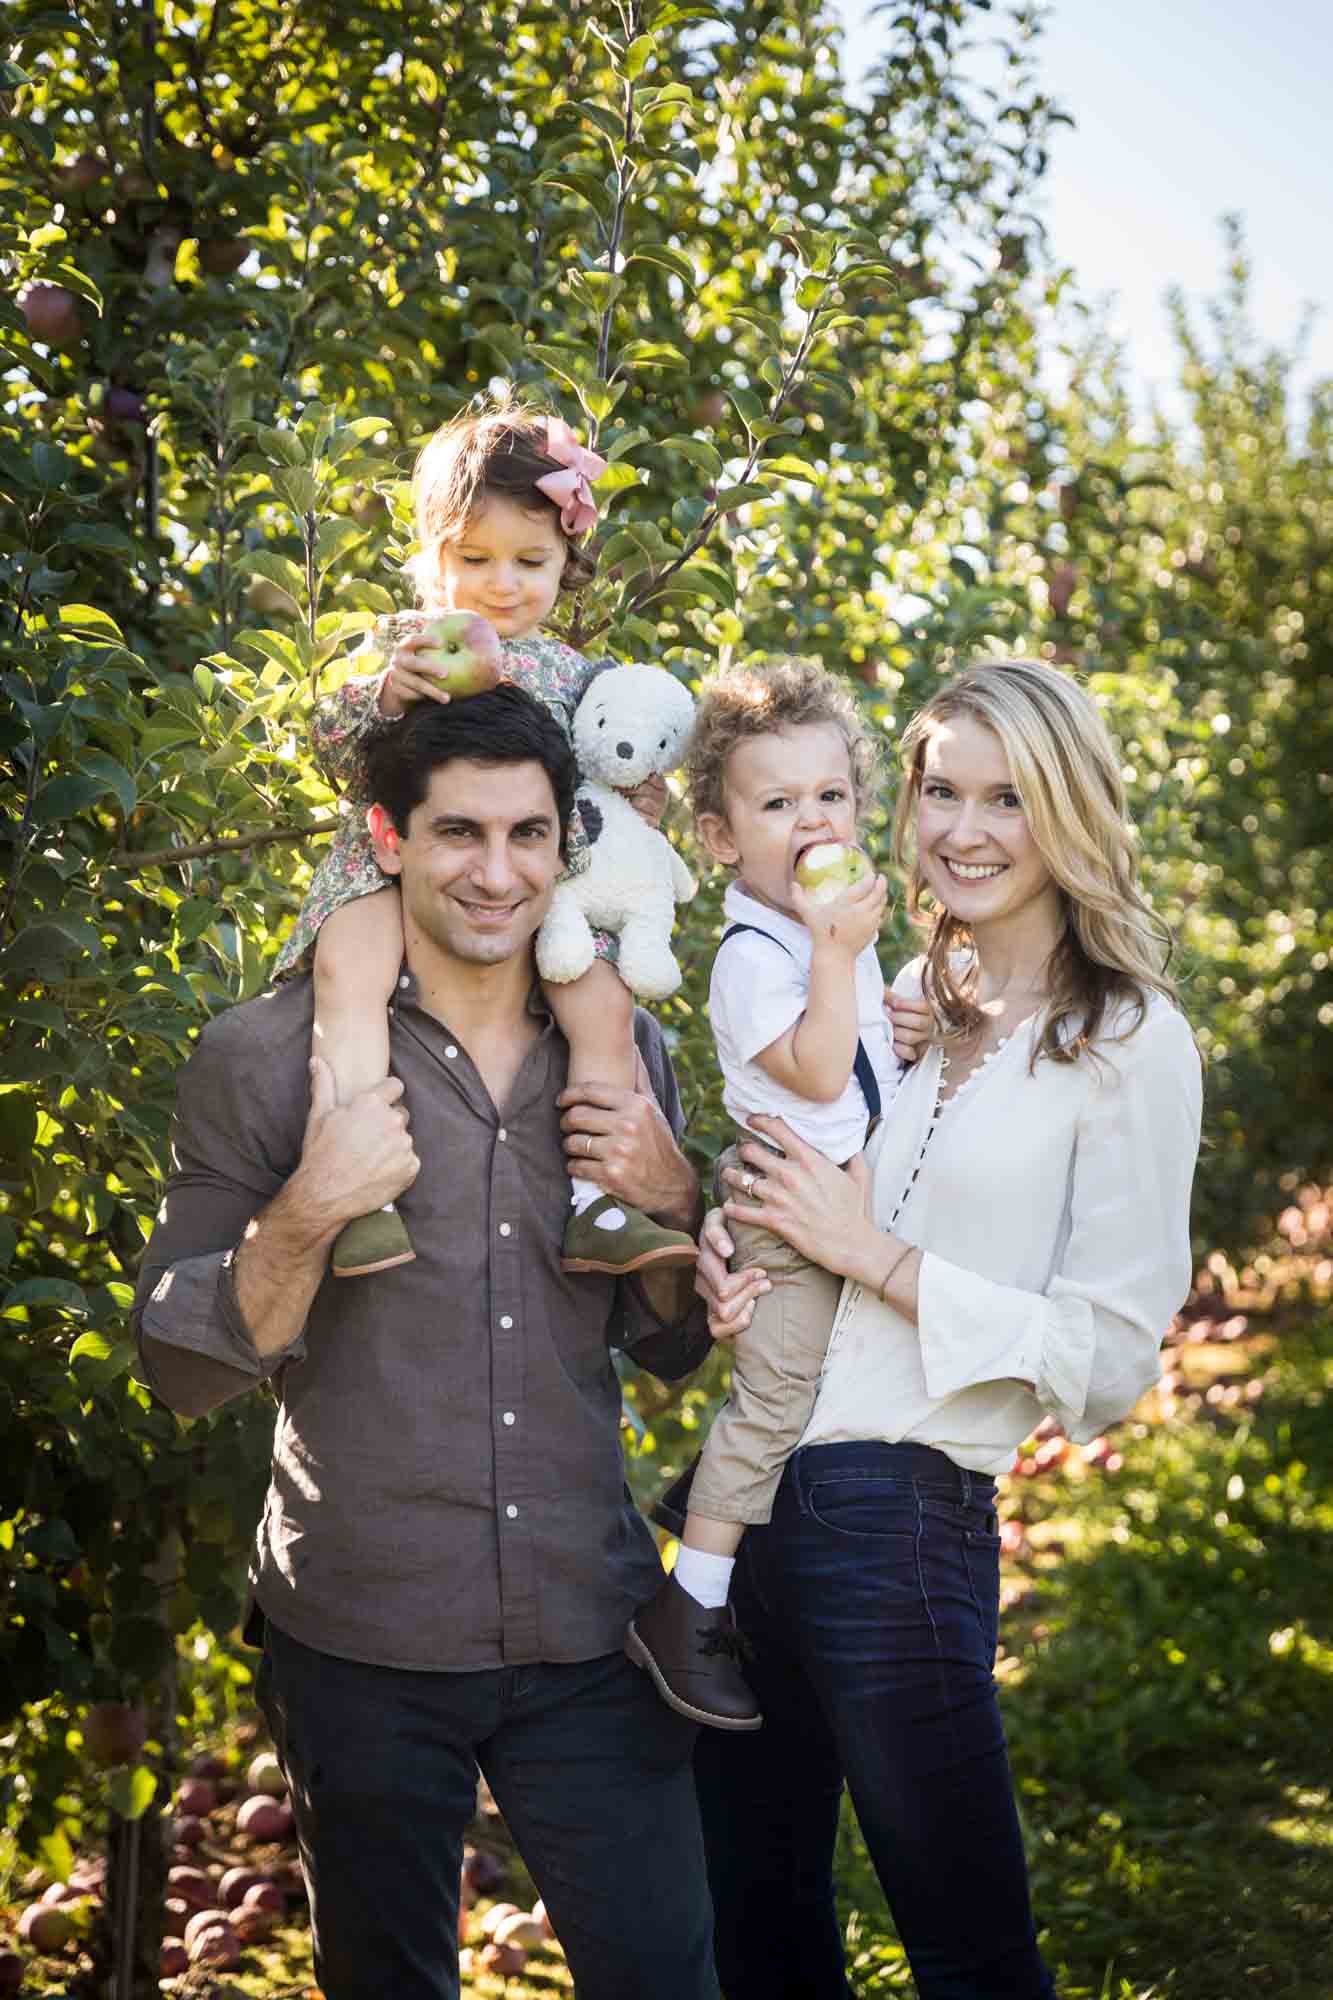 Parents holding little children in an orchard for an article on tips for apple picking family photos